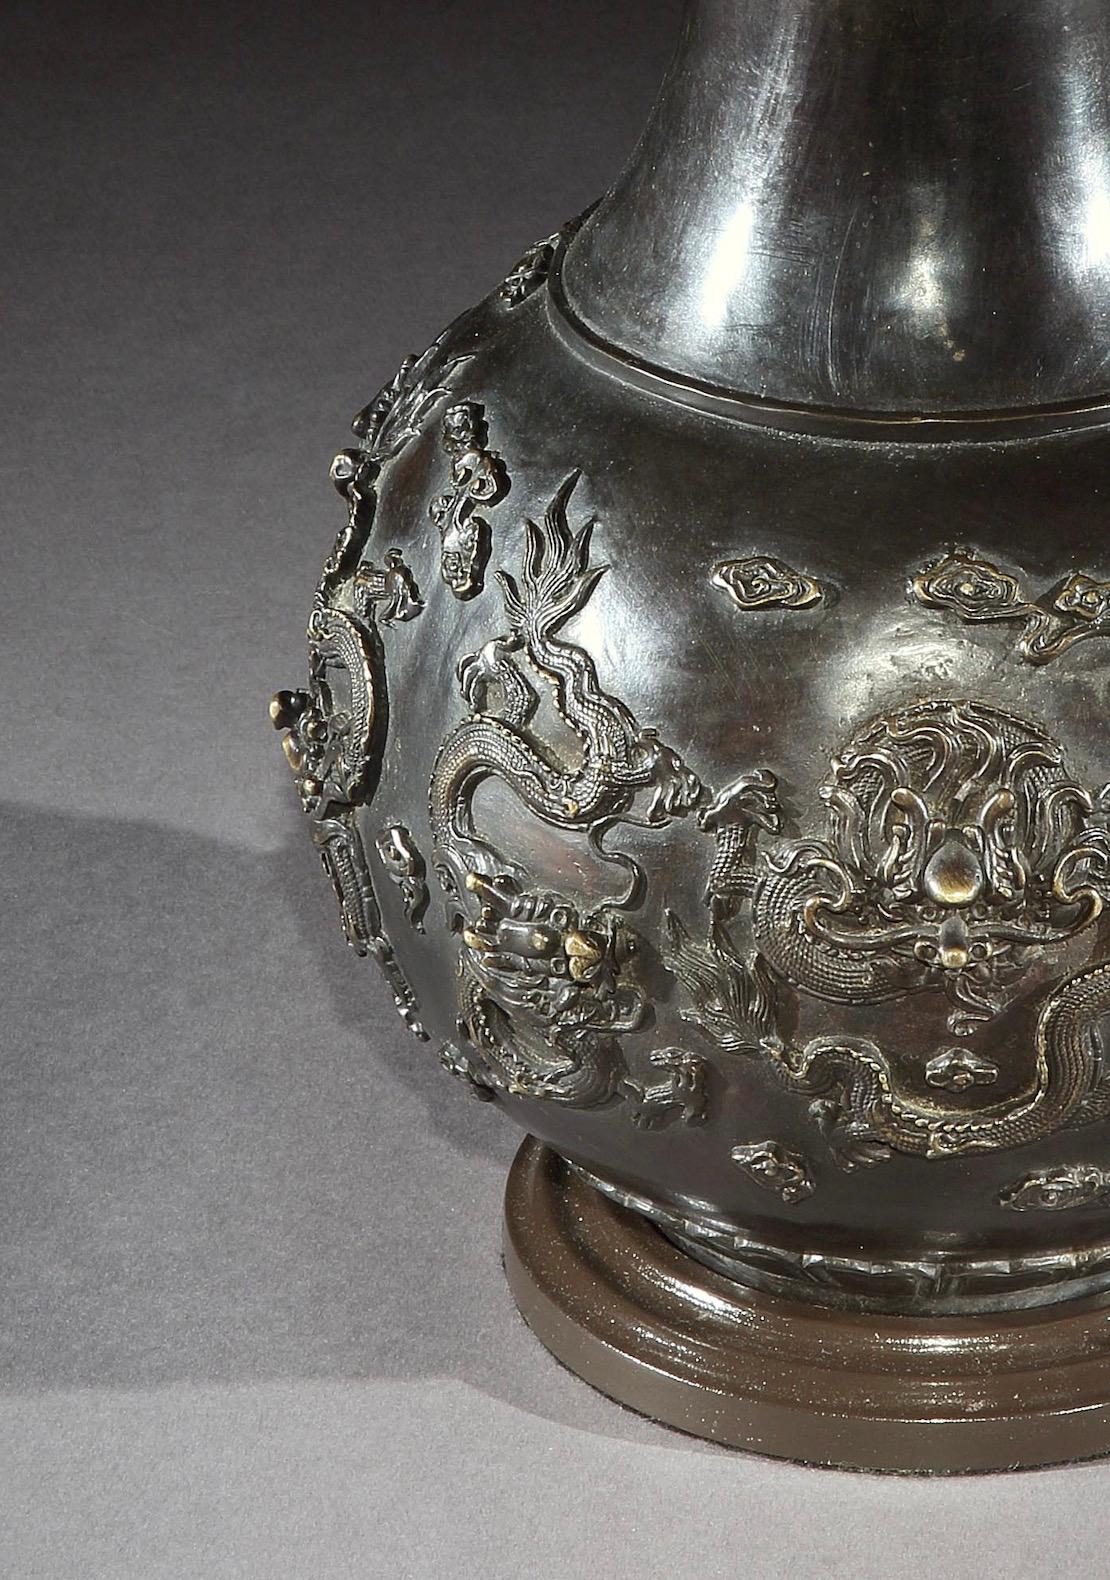 A Chinese bronze vase featured applied decoration of four dragons chasing the flaming pearl. Now mounted as a lamp.

Height of vase: 16½ in (42 cm) including base, excluding electrical fitments and lampshades 

This lamp can be wired for use